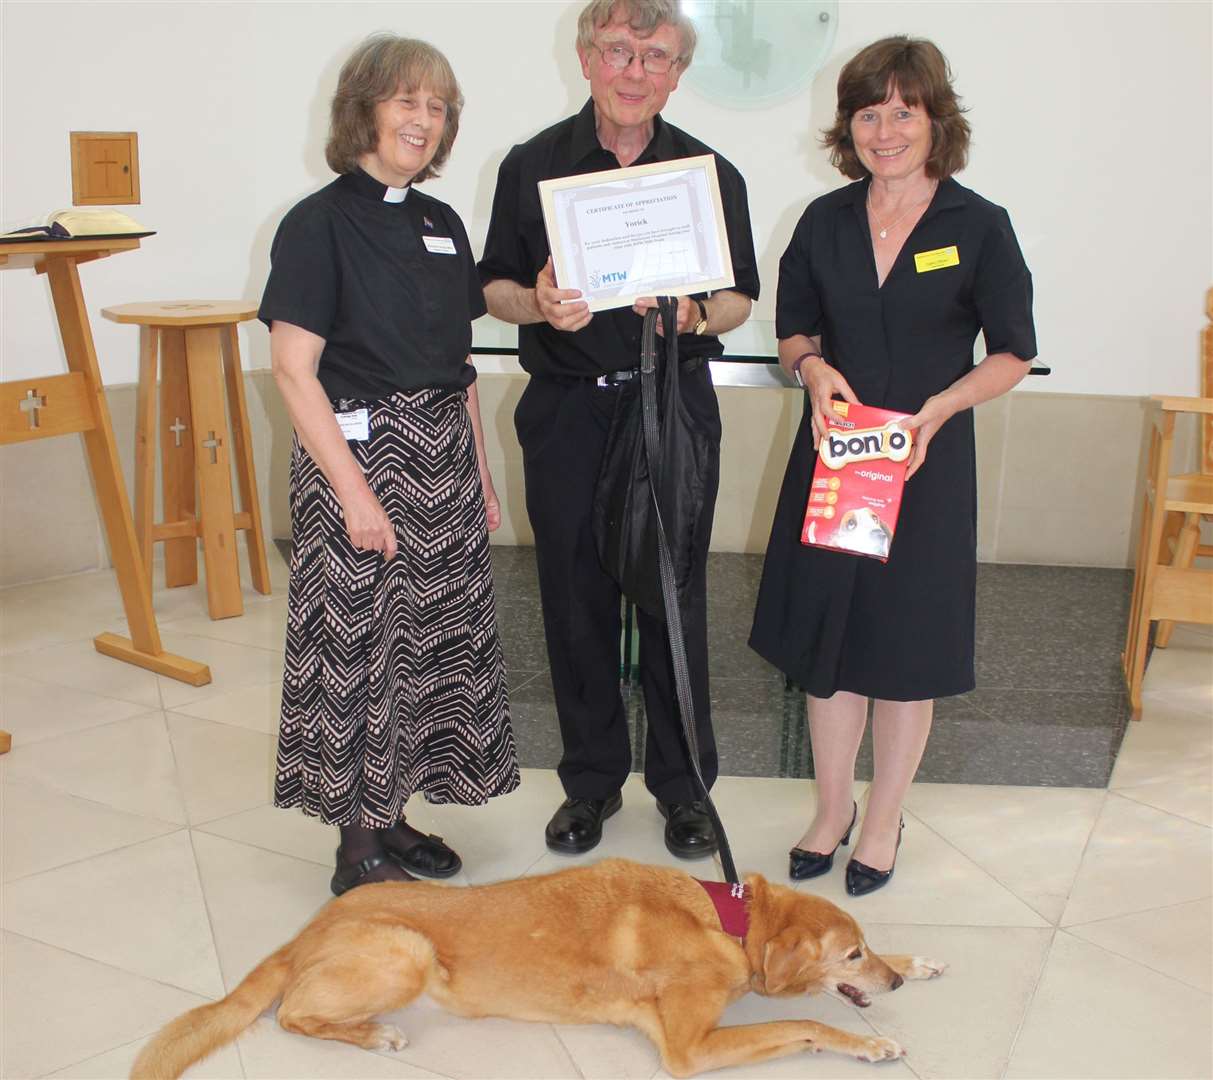 The lurcher was given a certificate and a box of his favourite treats